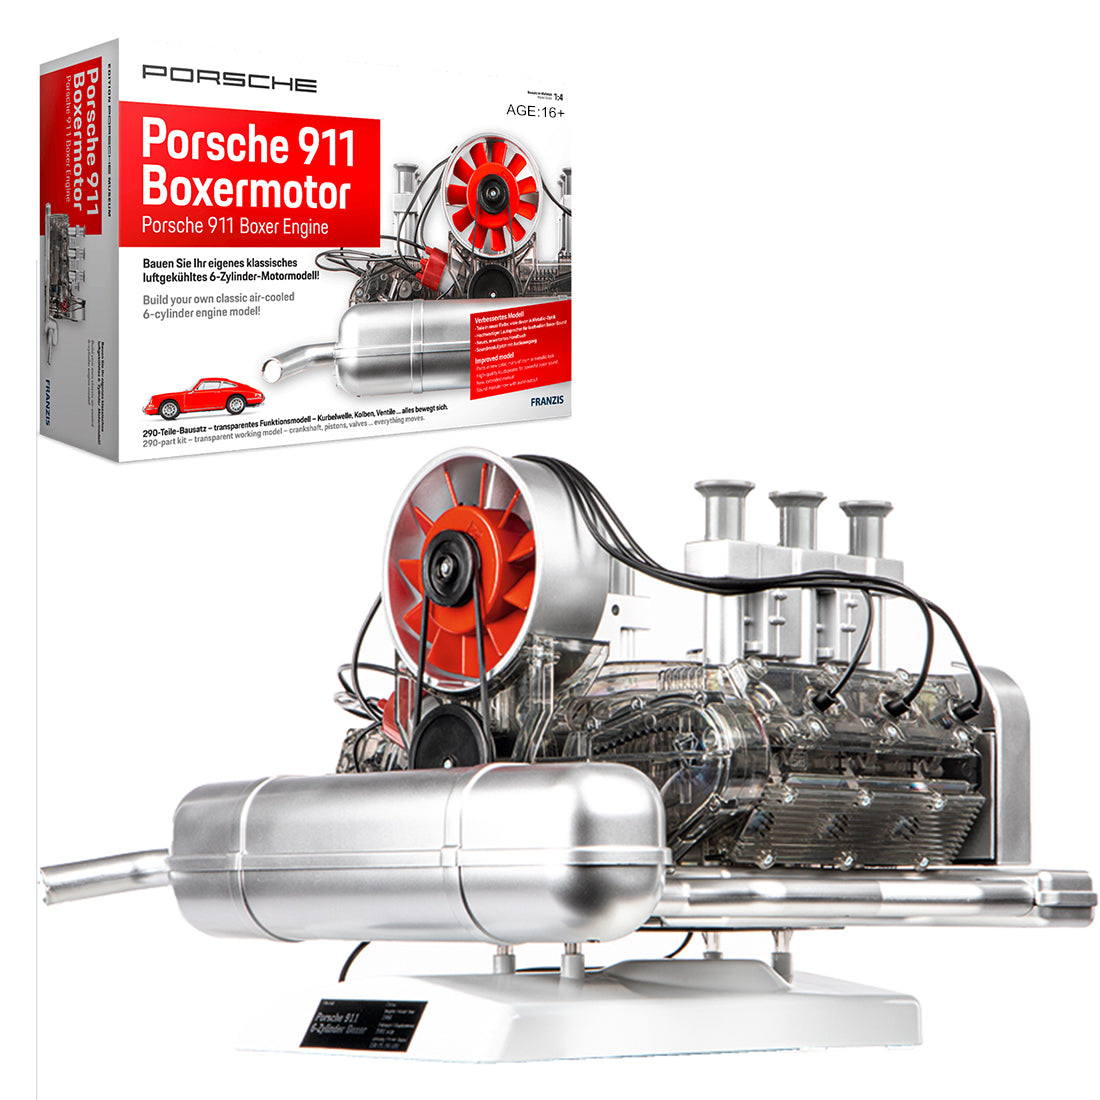 Porsche 911 Boxer Engine Model Kit - Build Your Own Classic Air-cooled 6-Cylinder Engine Model that Works